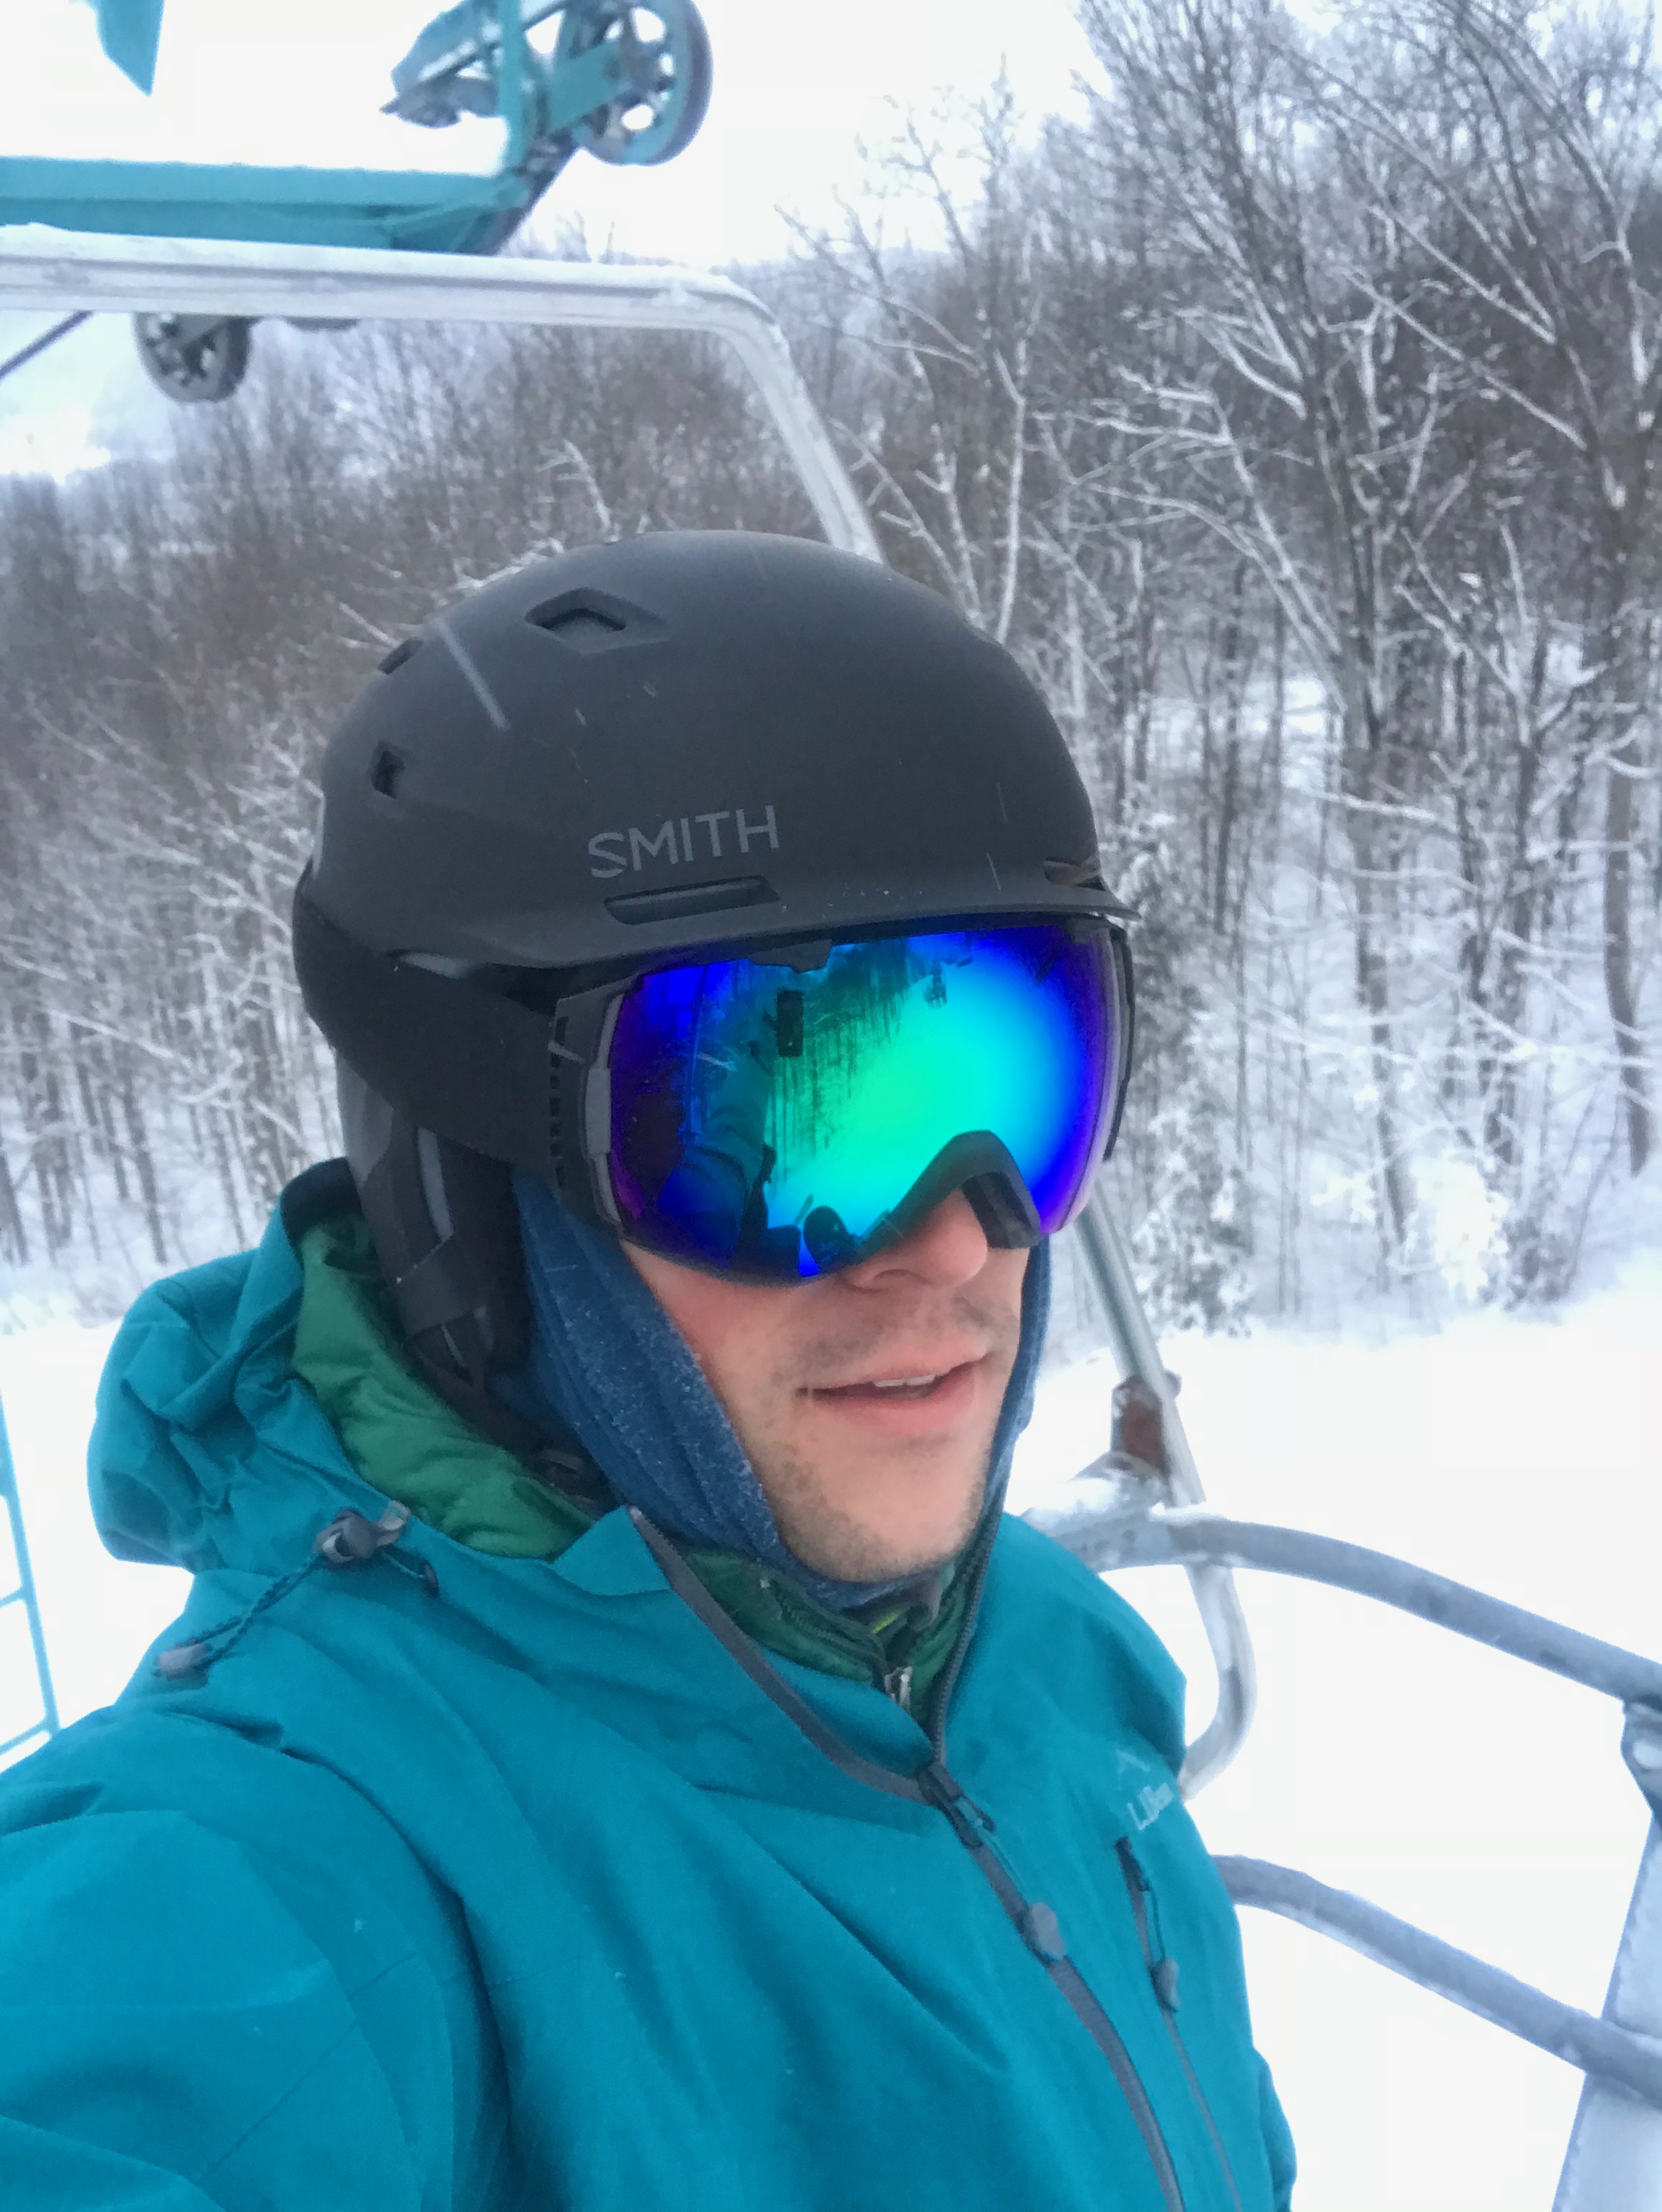 Smith Quantum Snow Helmet - Gear Review | Busted Wallet